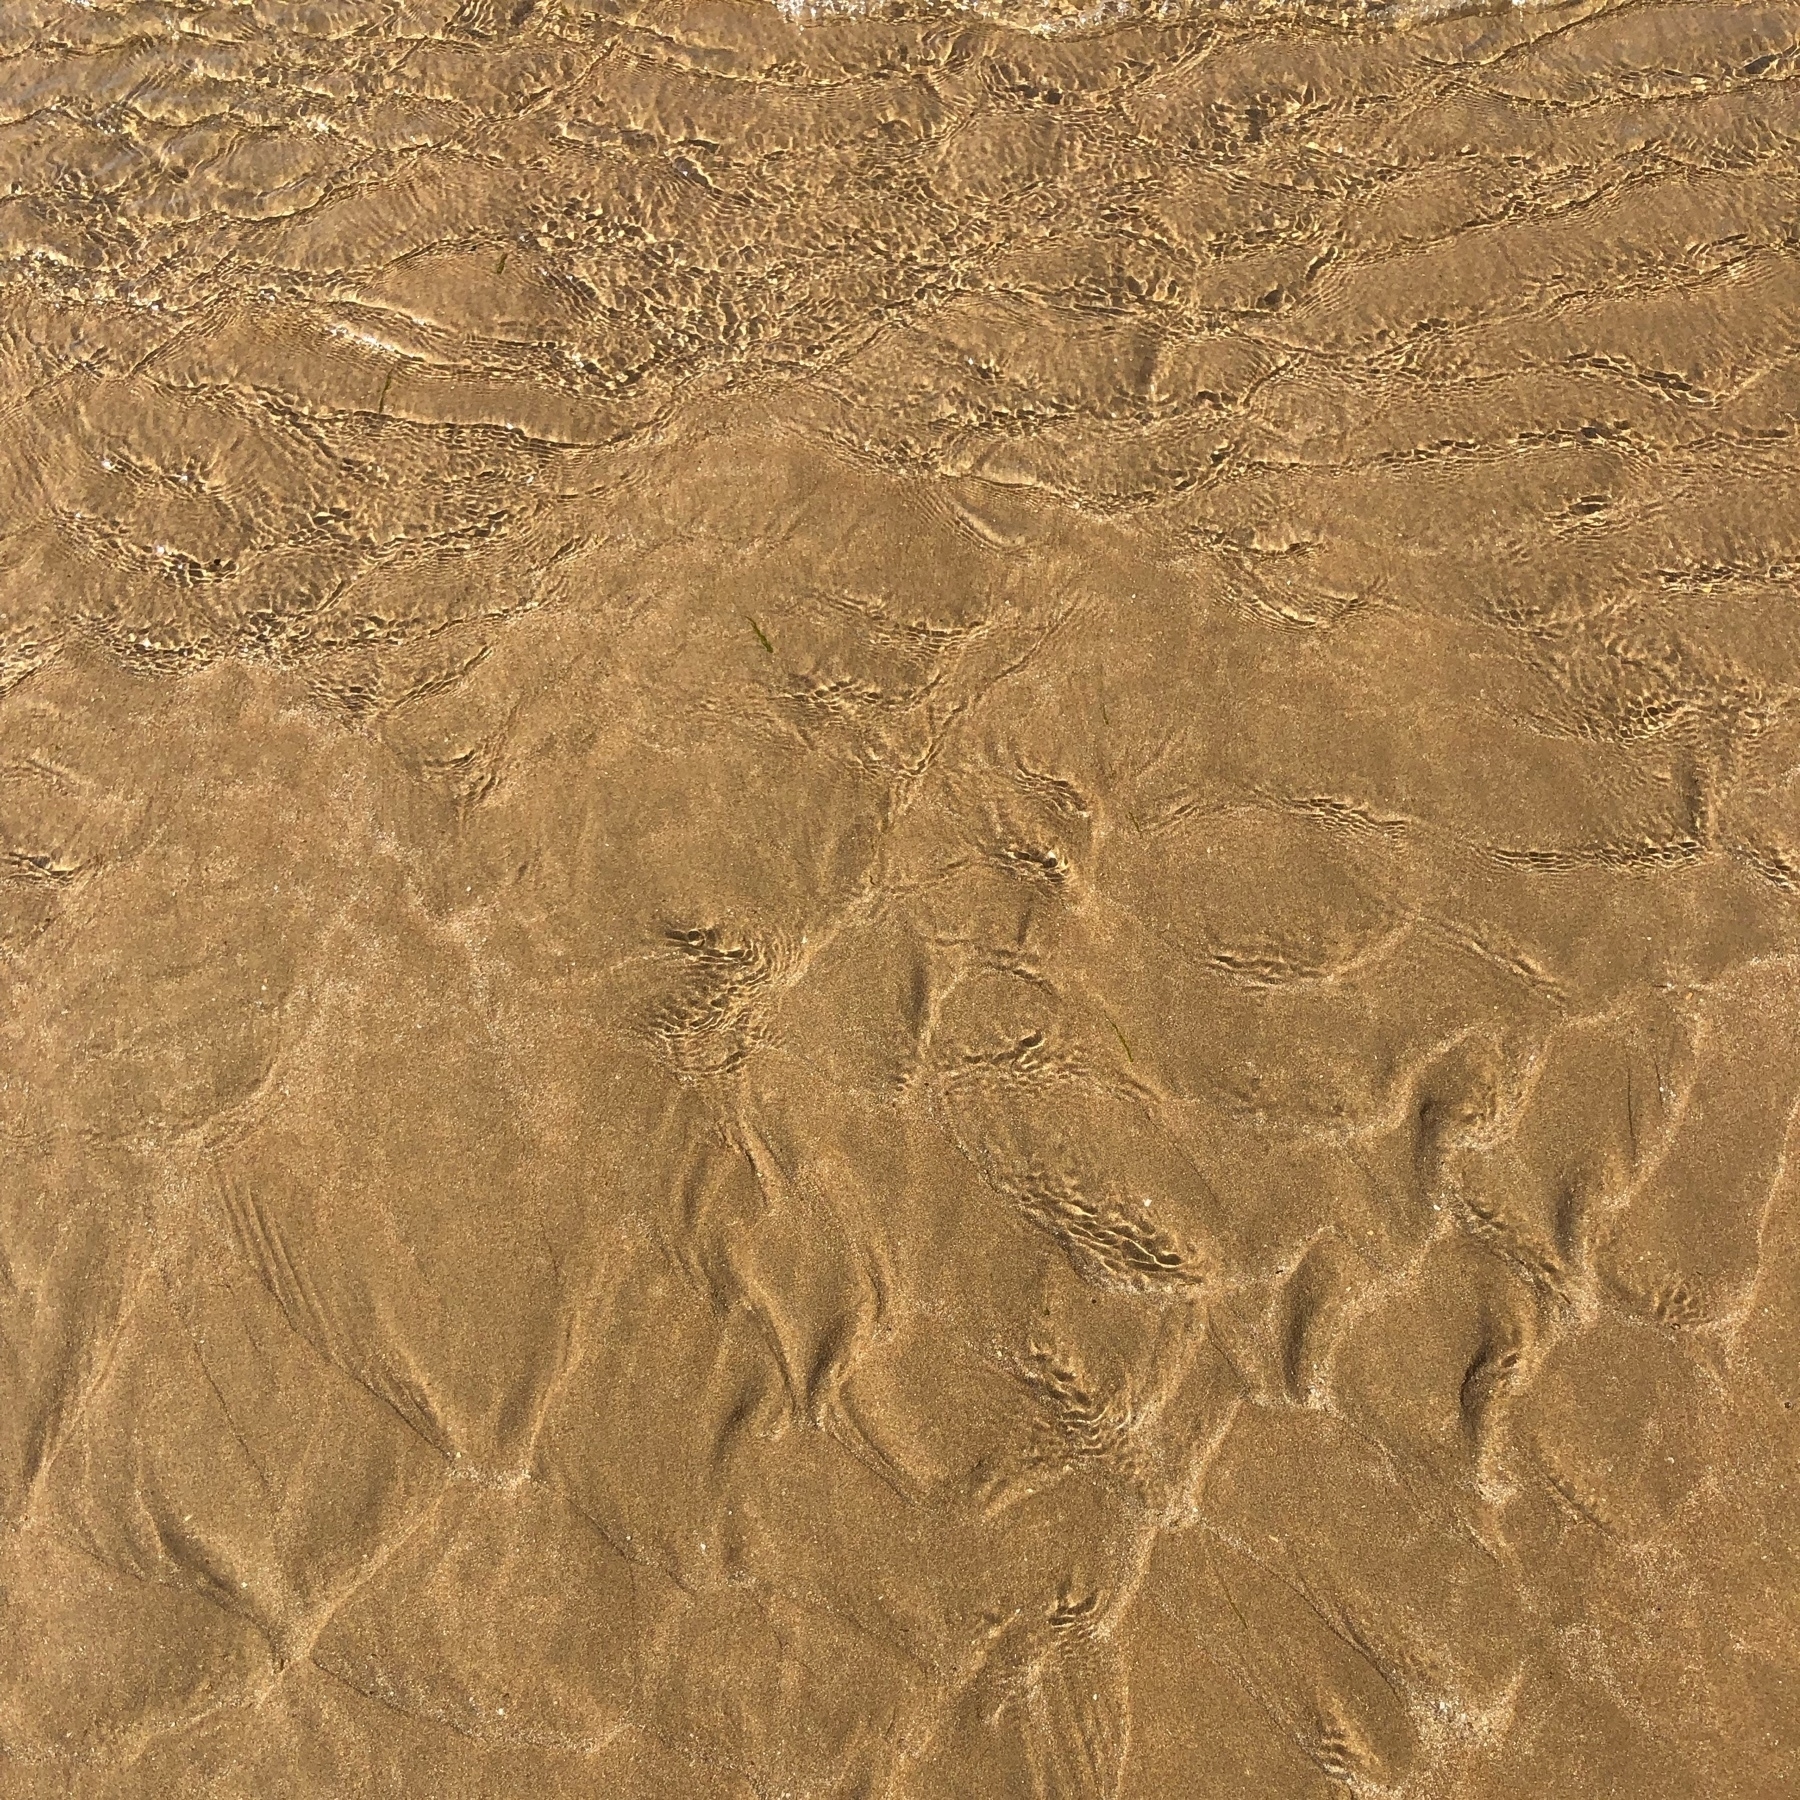 water coming out closer to my feet at the beach shore